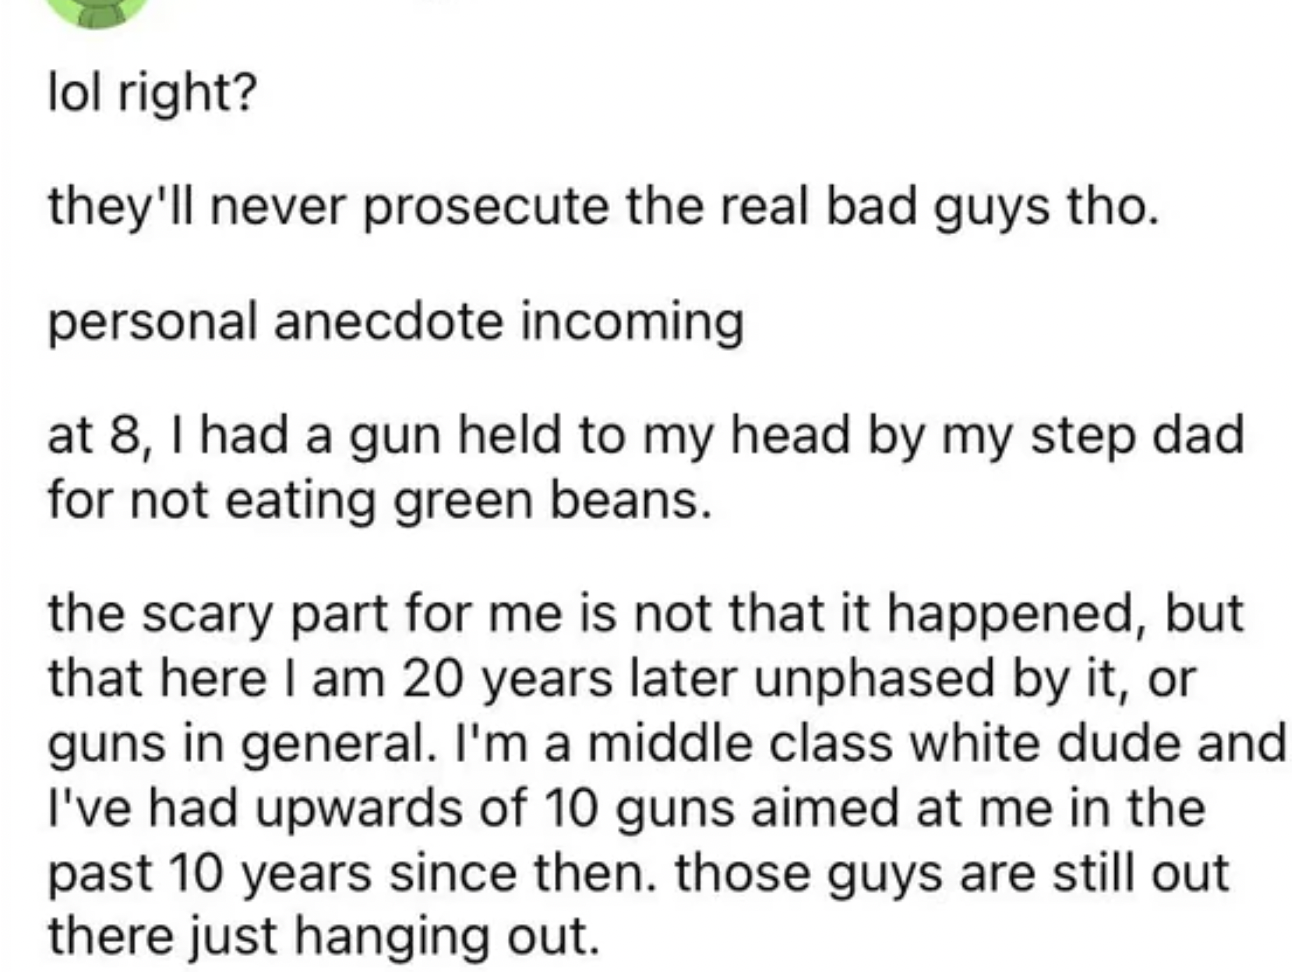 paper - lol right? they'll never prosecute the real bad guys tho. personal anecdote incoming at 8, I had a gun held to my head by my step dad for not eating green beans. the scary part for me is not that it happened, but that here I am 20 years later unph